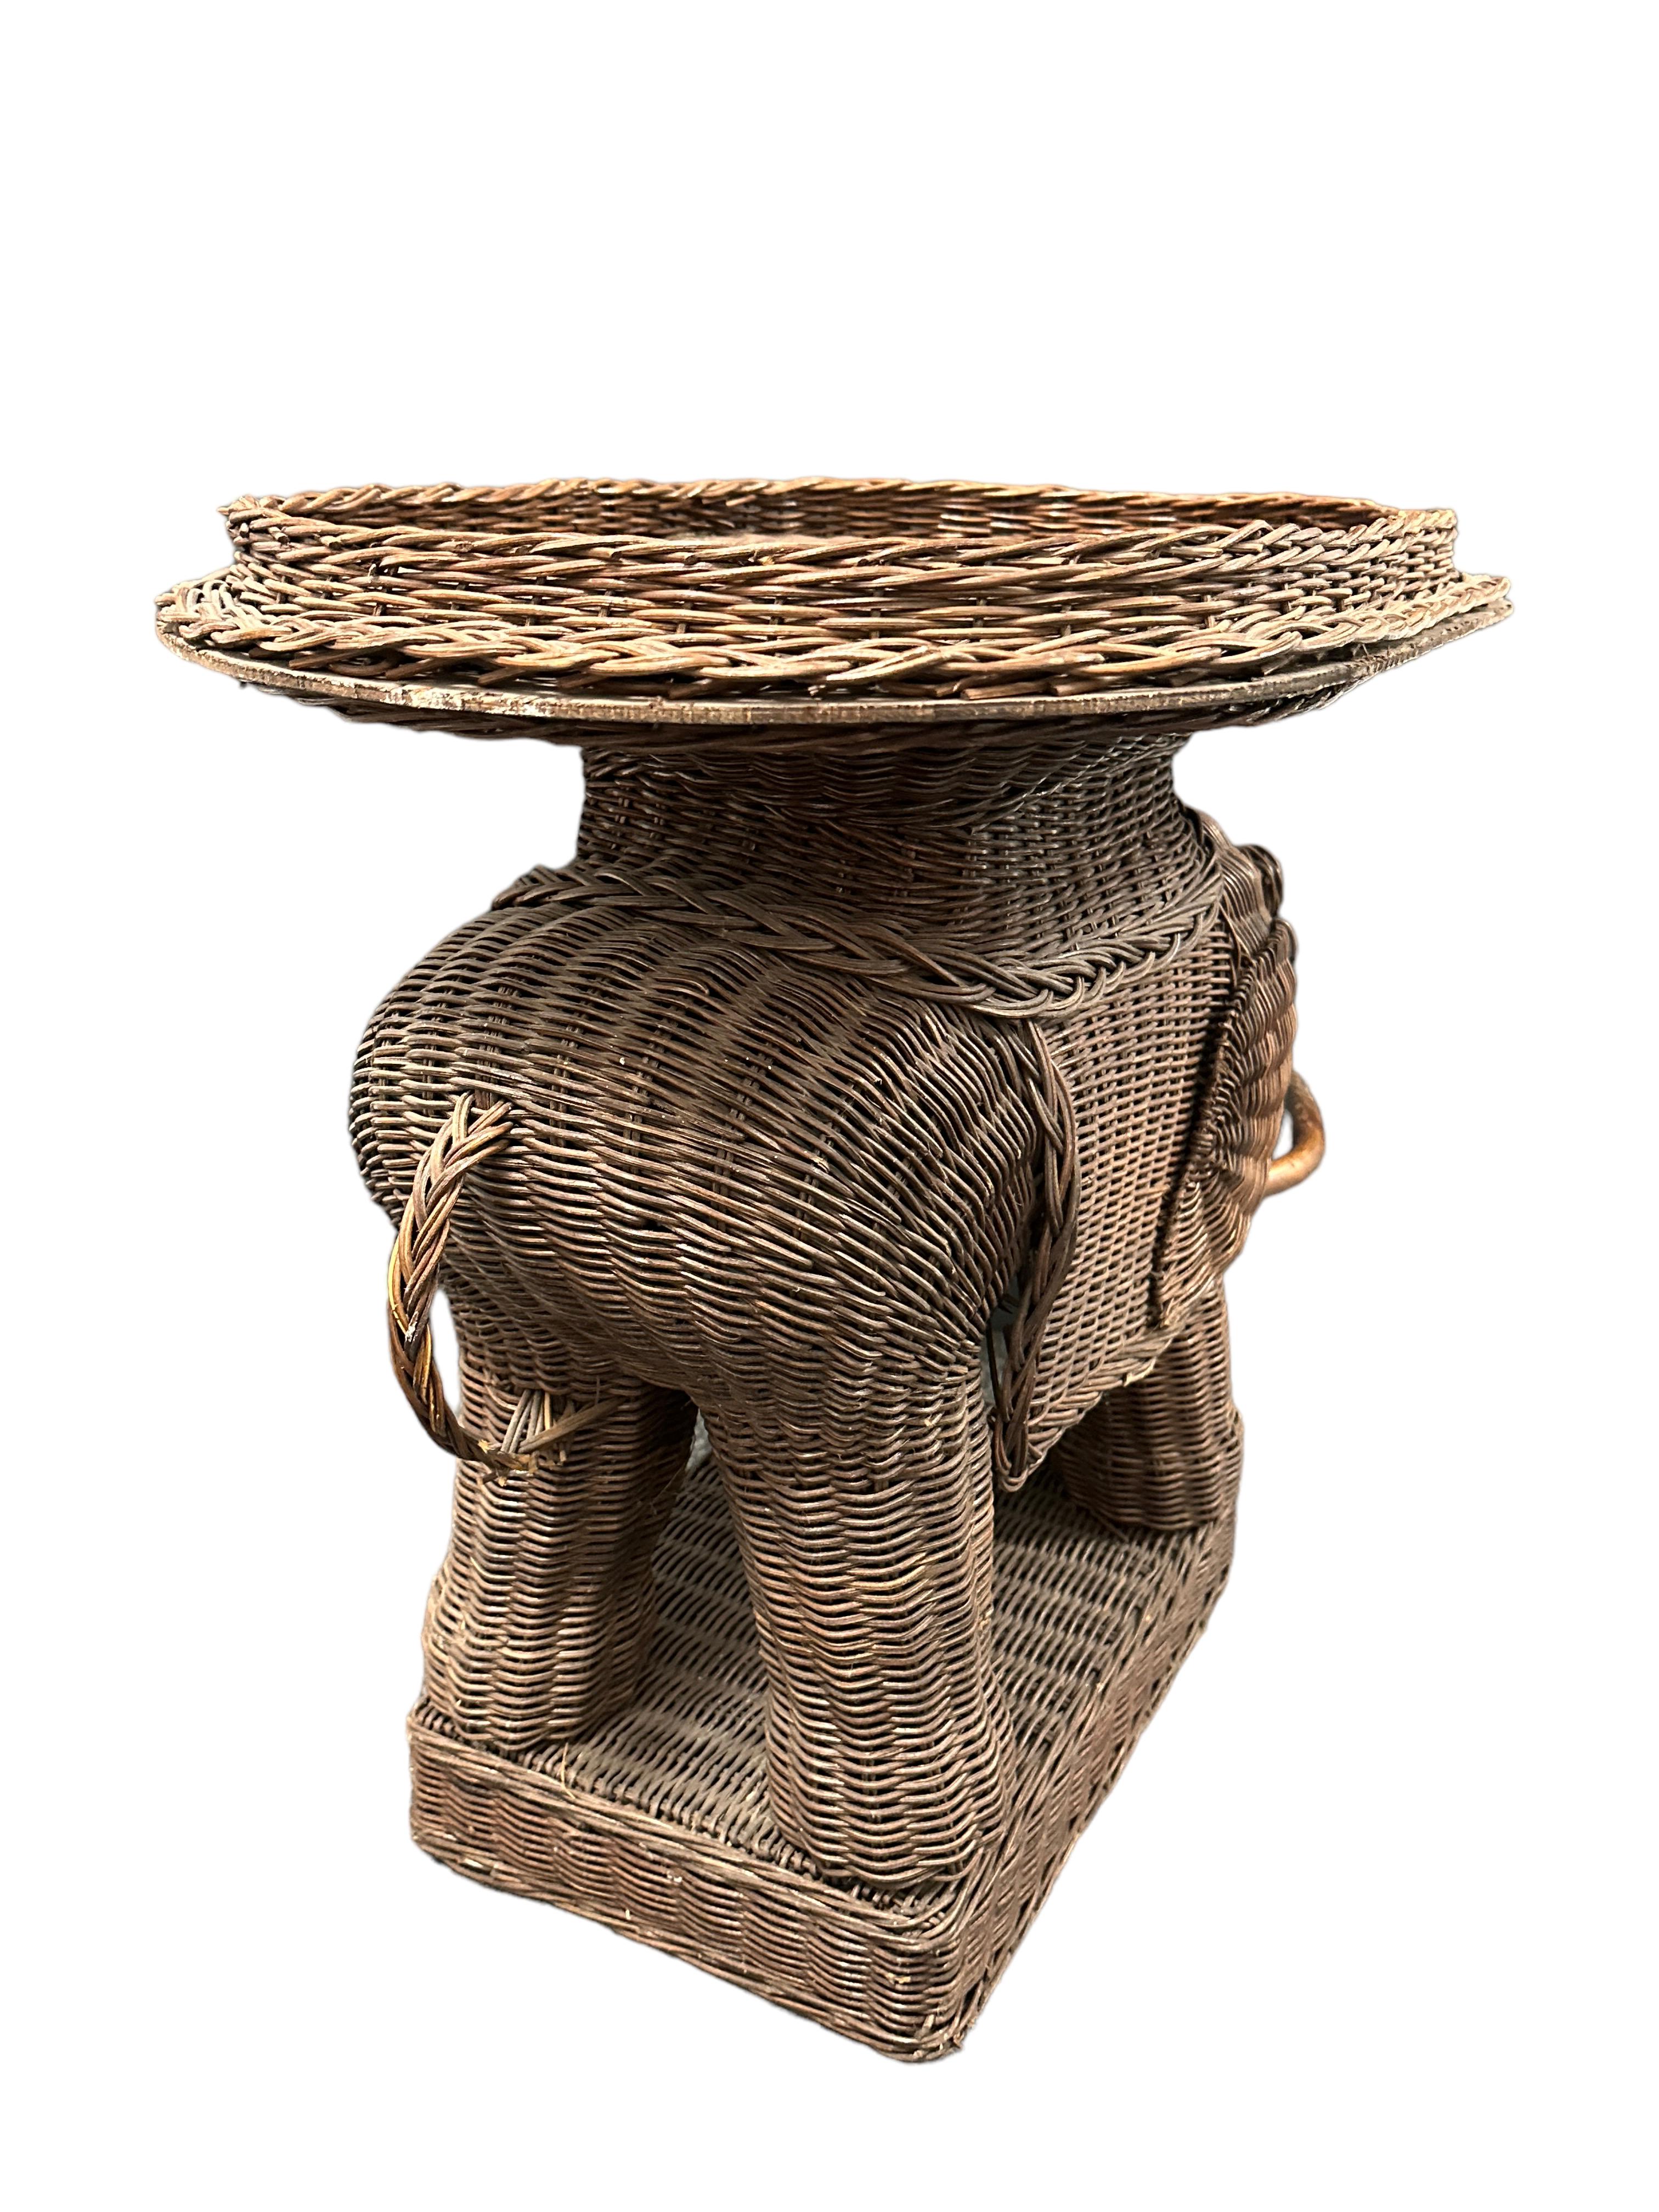 Hand-Crafted Stunning Rattan Wicker Elephant Side Table with Tray, France, 1960s For Sale